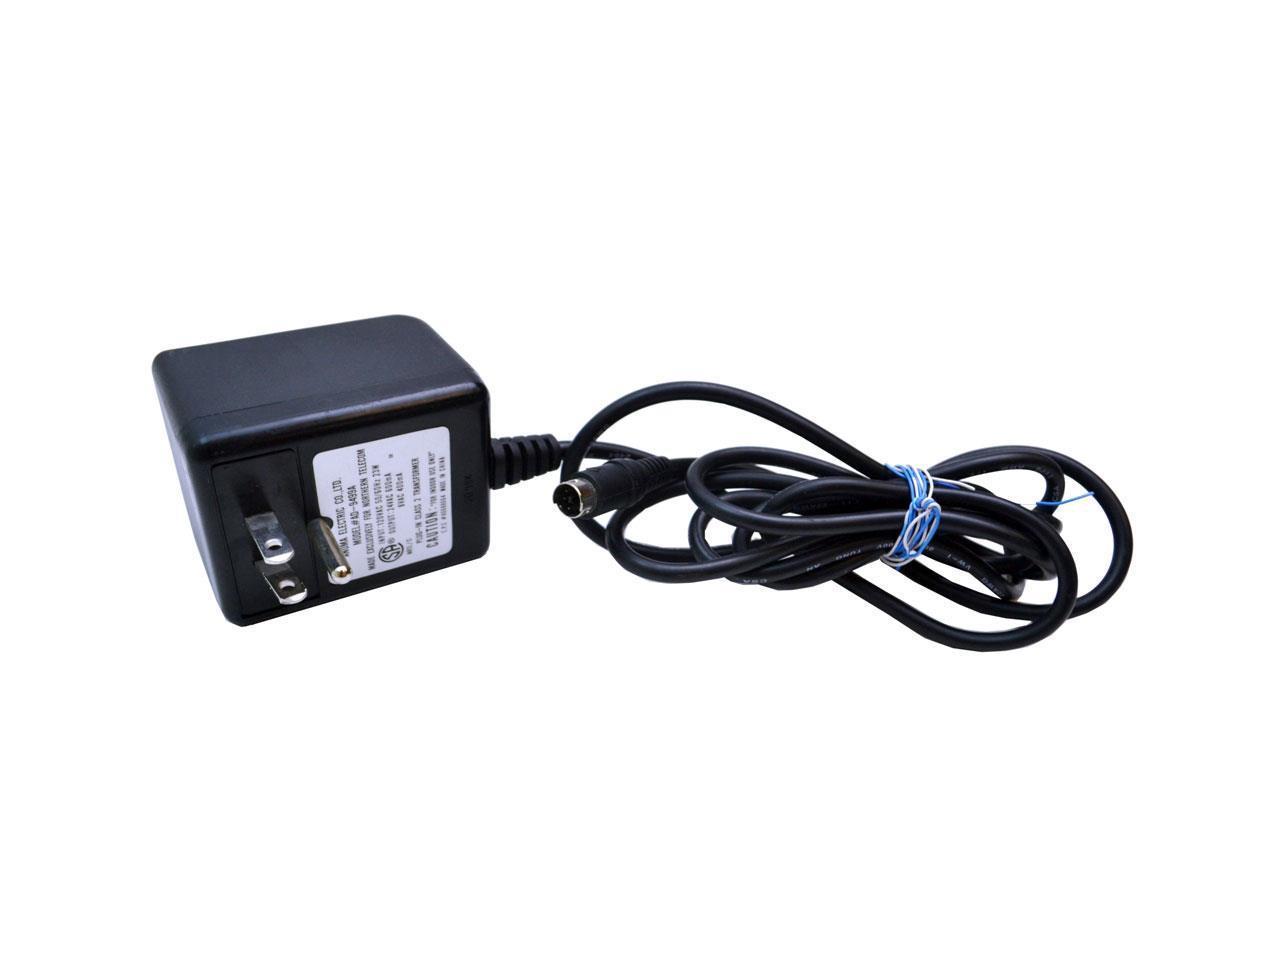 48V 1A AC to DC Adapter Converter for FSP Group FSP025-1AD207A 48V 0.5A~1A 